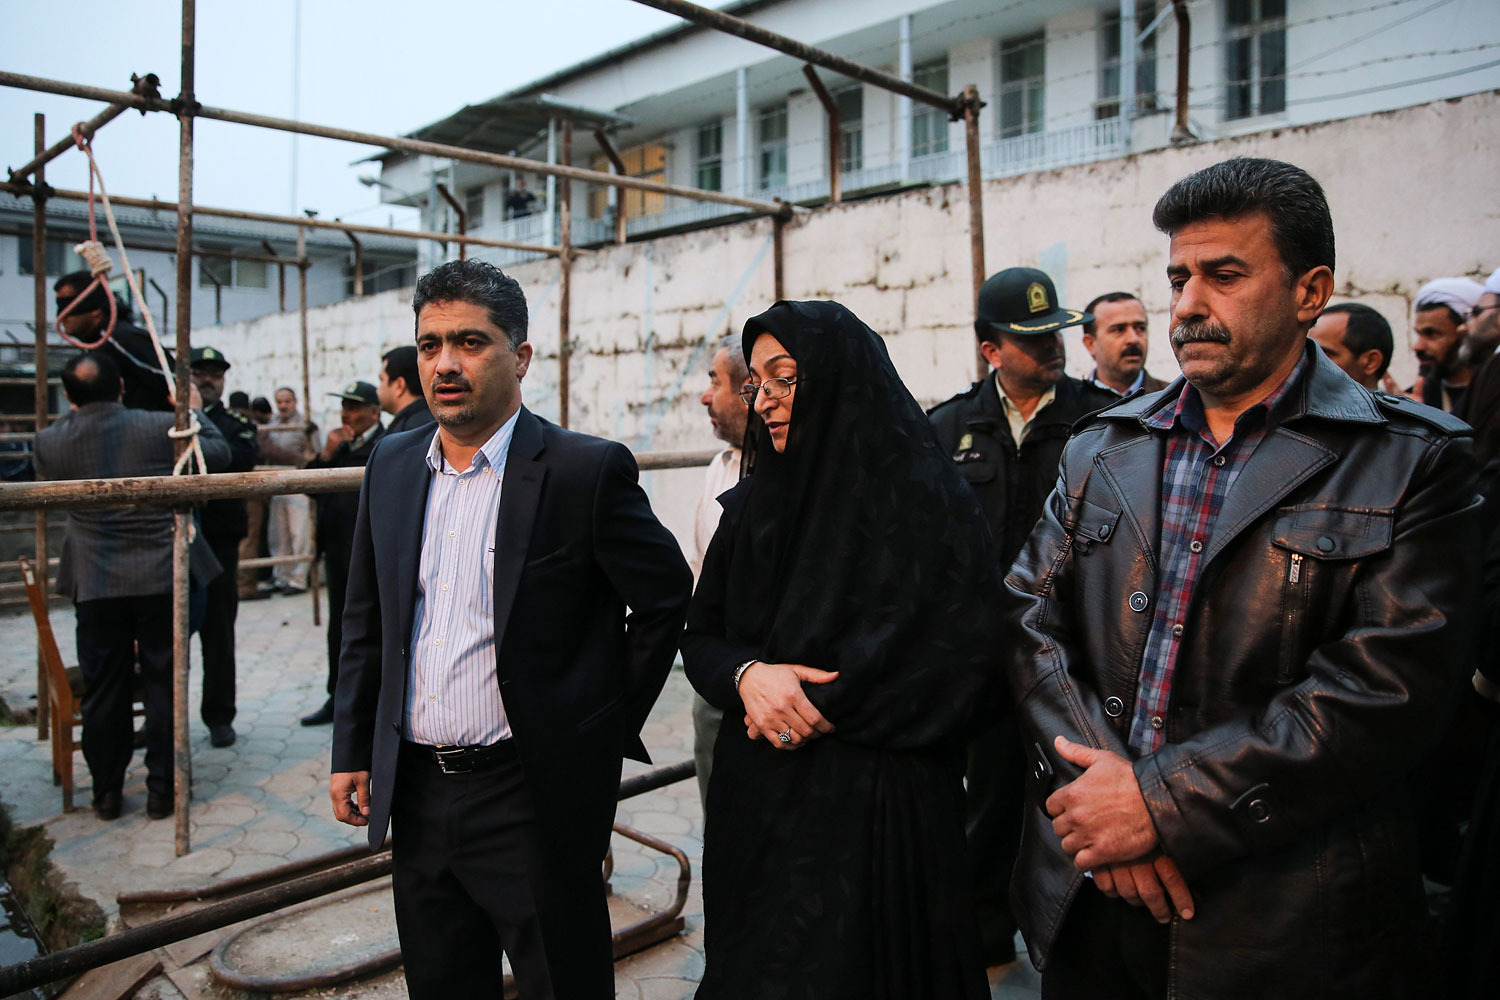 Samereh Alinejad, and Abdolghani Hosseinzadeh, the parents of Abdolah Hosseinzadeh, stand next to the gallows during Balal's execution ceremony in the northern city of Nowshahr on April 15, 2014.